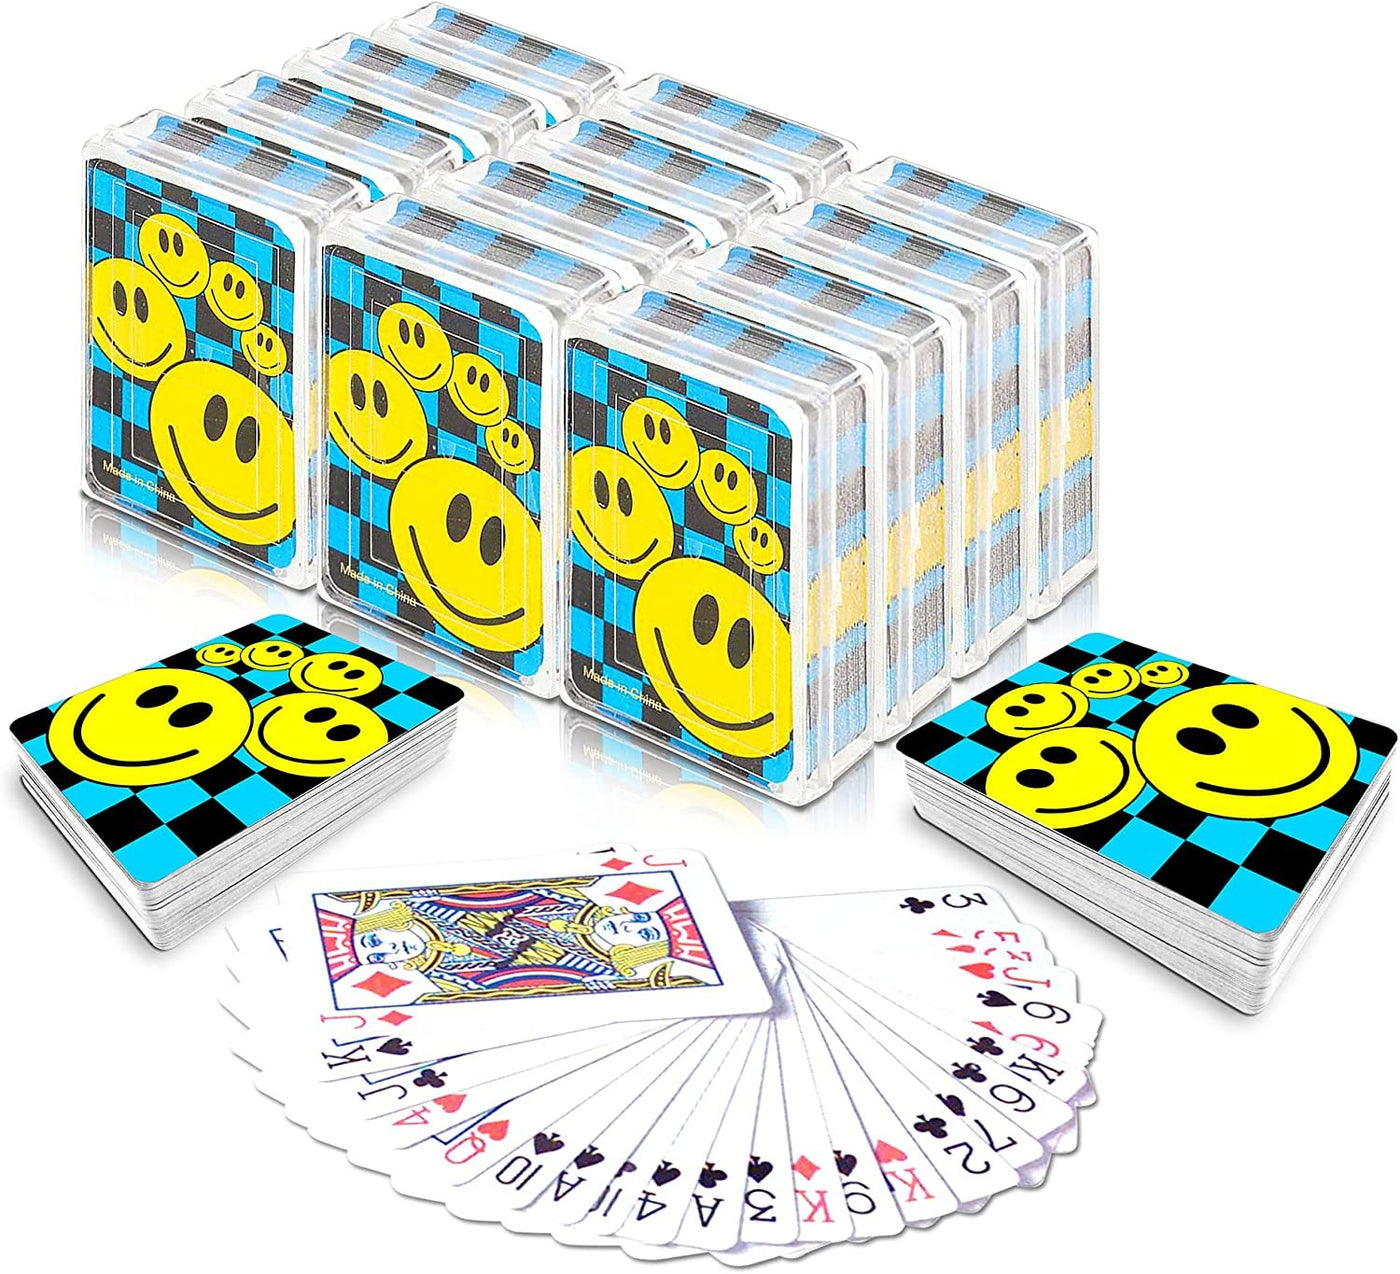 Gamie Mini Smile Playing Cards Deck - Pack of 12 - 2.5"es Tall - Blue Checkerboard Background - Poker-Casino Cards - Carnival Prize, Party Favor and Gift Idea for Kids Ages 3+